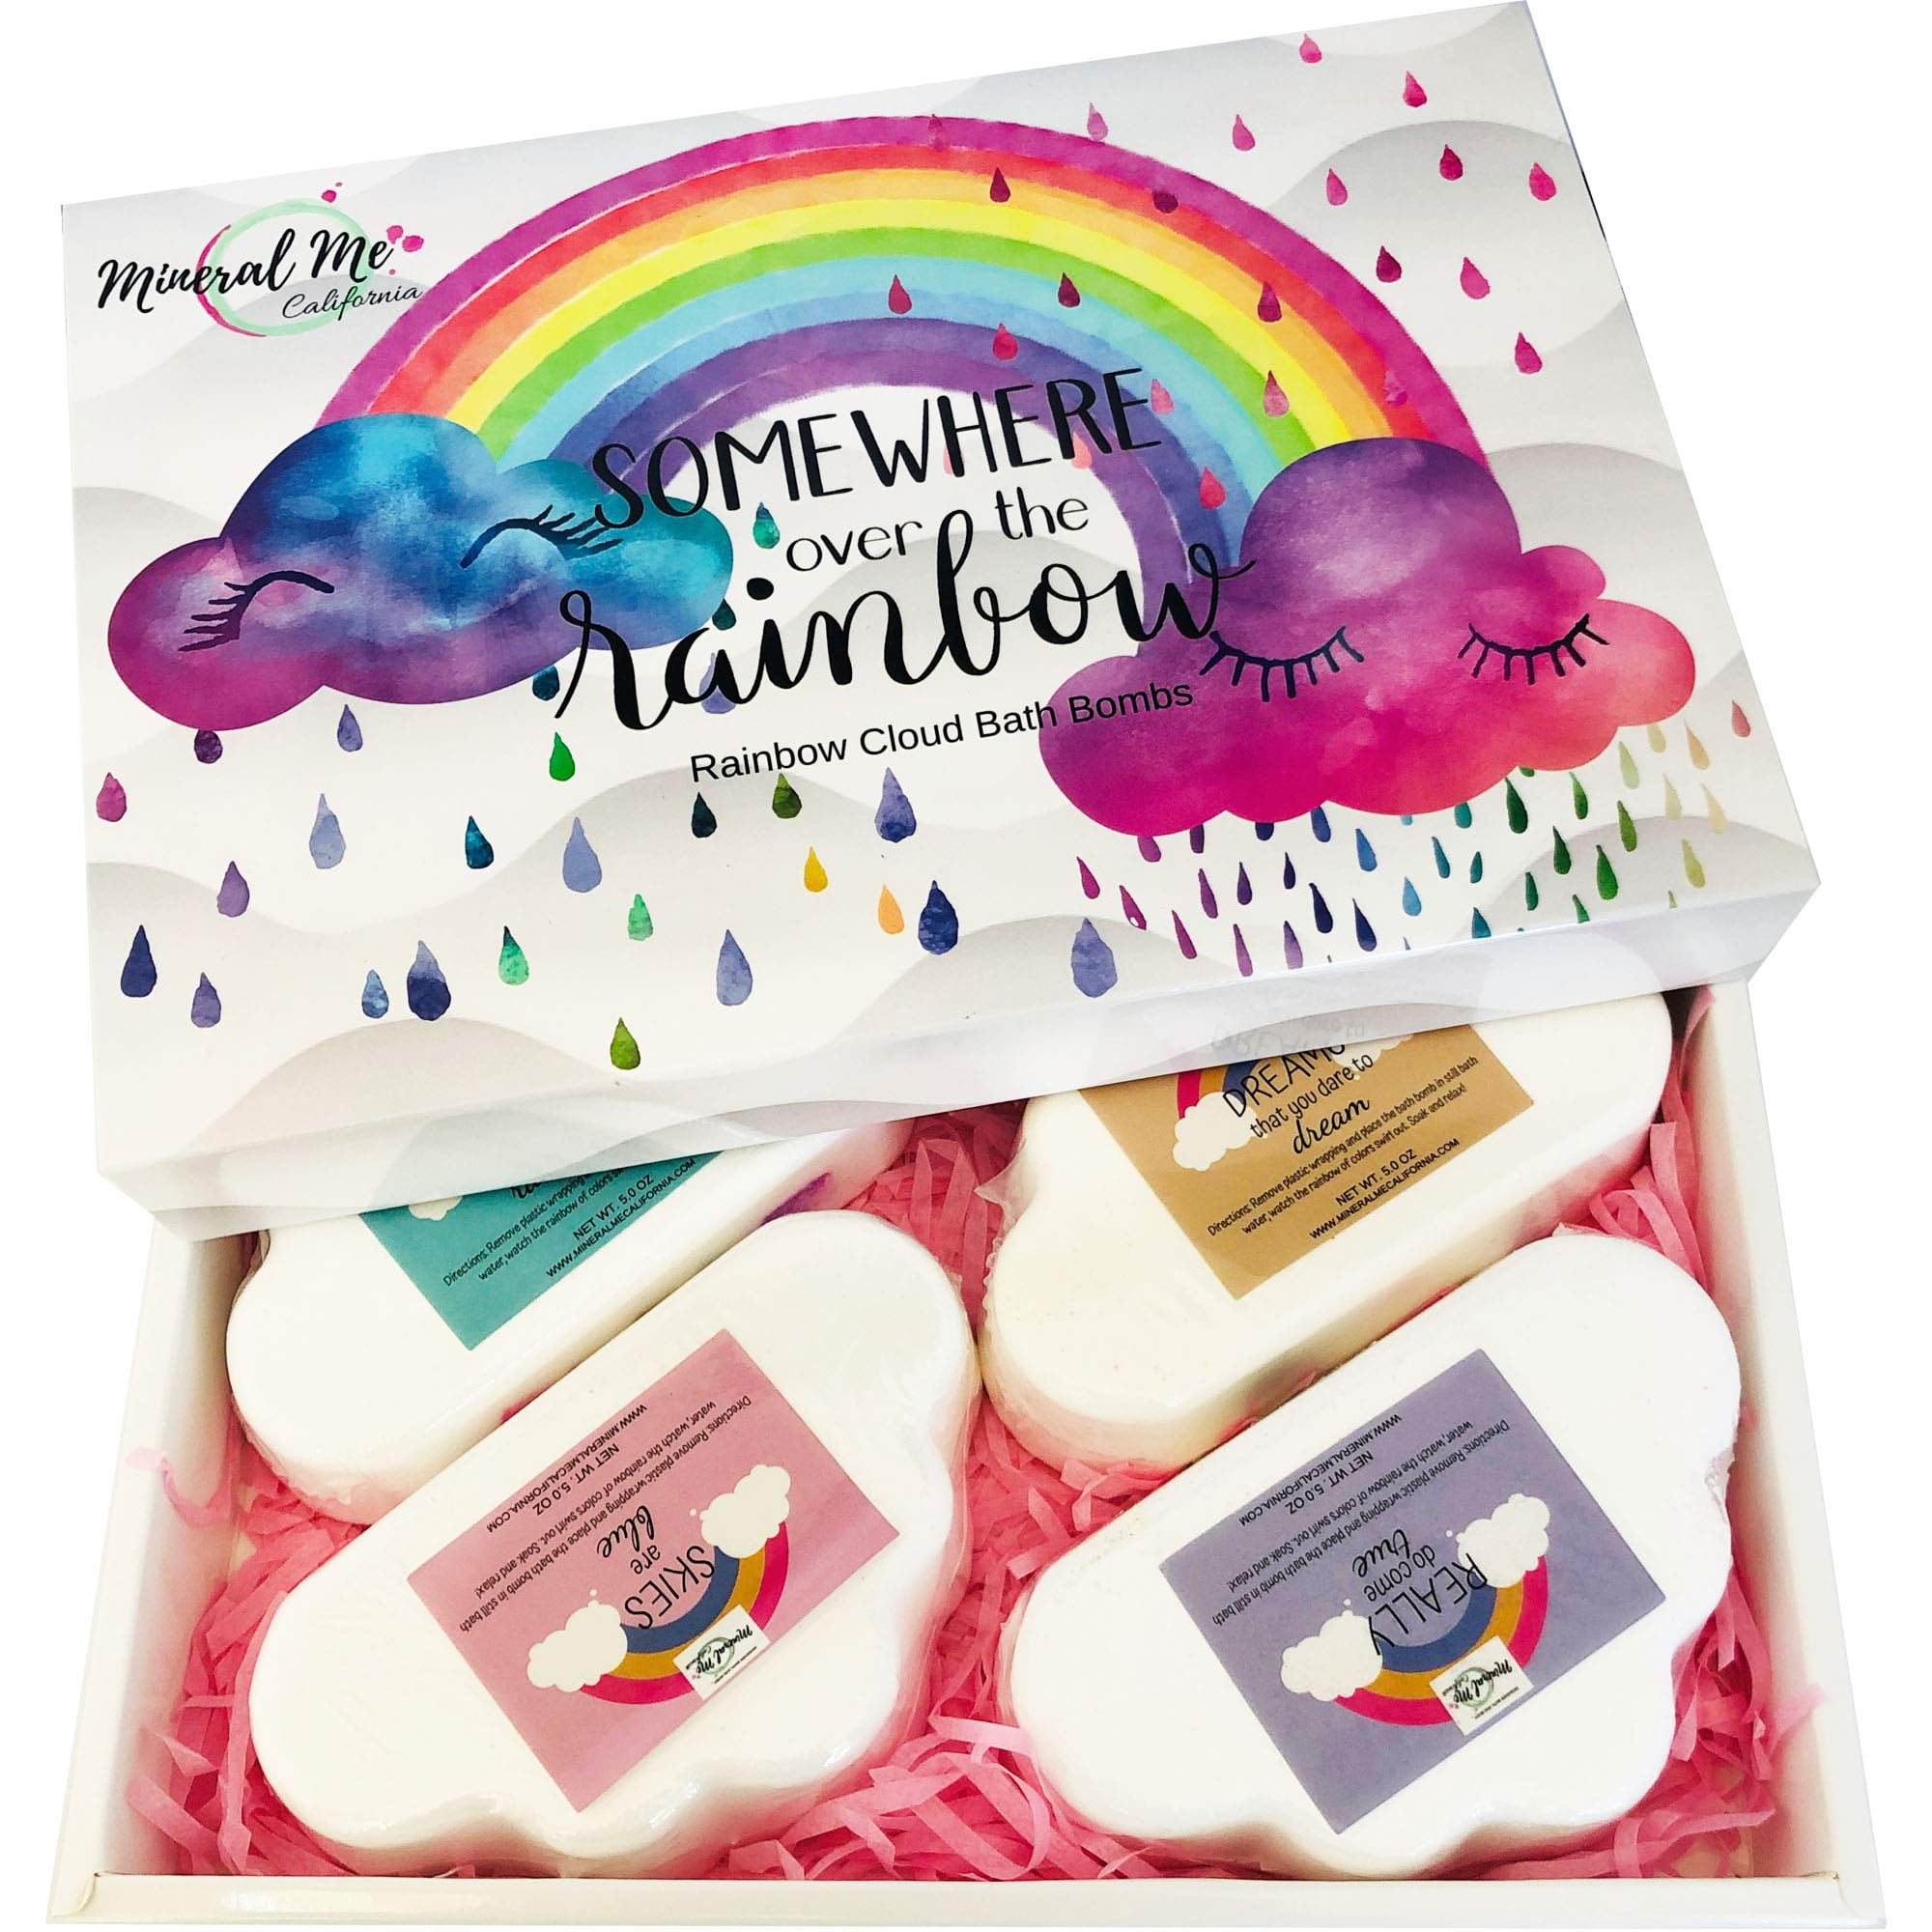 Rainbow Bath Bomb Gift Set of 4 - Bath Bombs for Women w/Moisturizing Shea  Butter and Natural Oils for Aromatherapy Relaxation Soak- Gift for Her, 